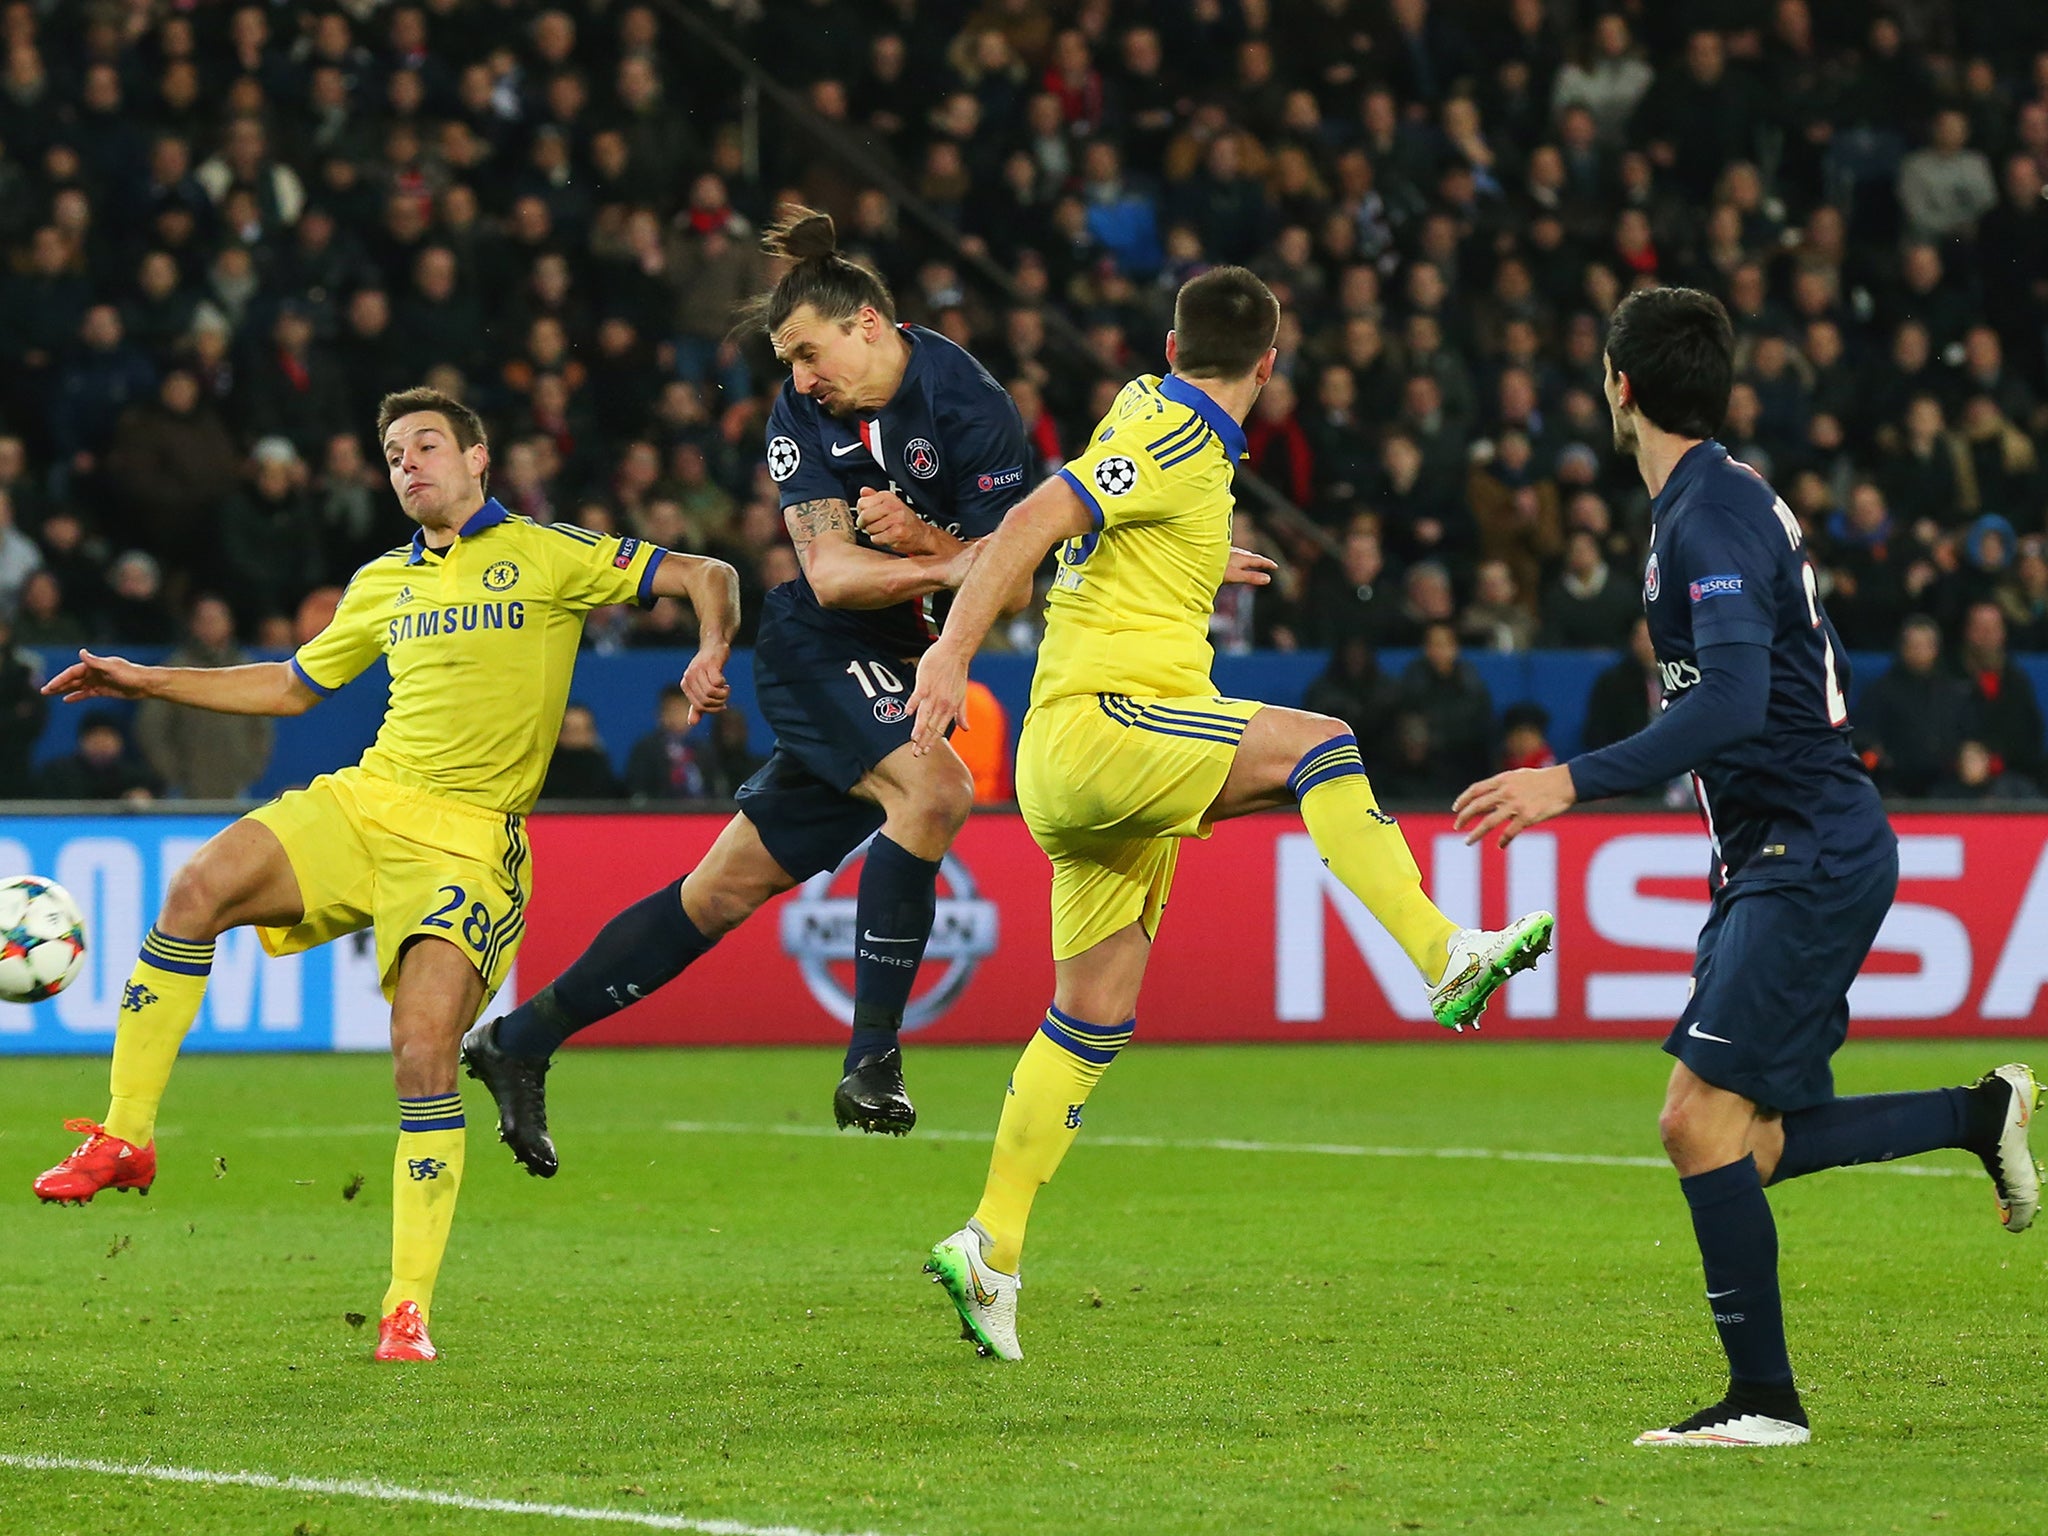 PSG were the better team in the first leg but Chelsea will know to play it safe again